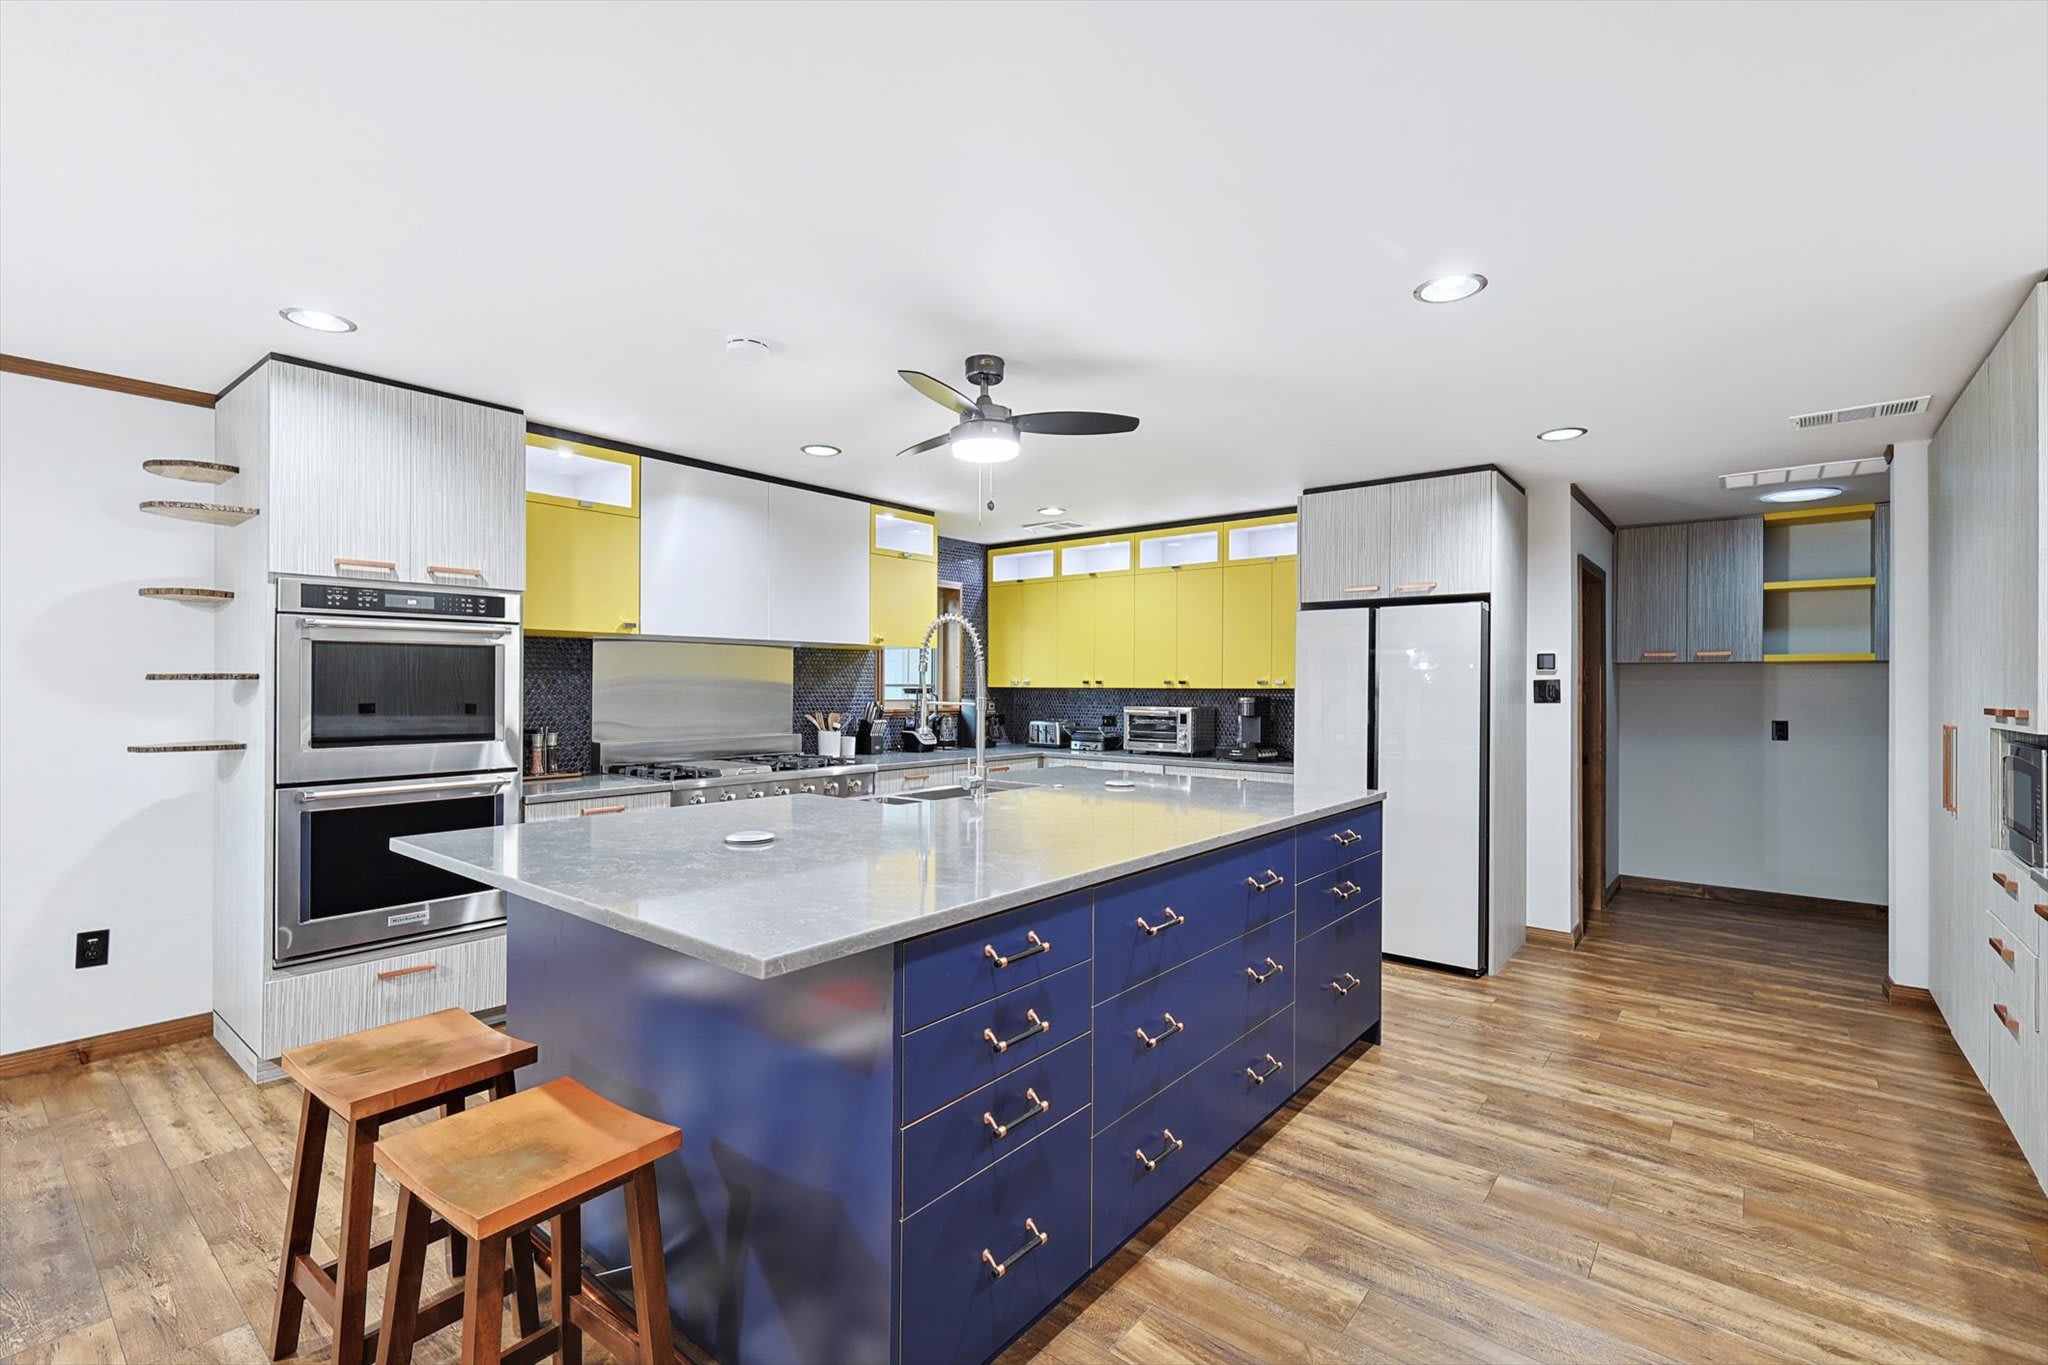 Unique and unlike any other kitchen, the contrasting yellow and blue create a modern, sophisticated culinary space for you to unleash your inner chef.